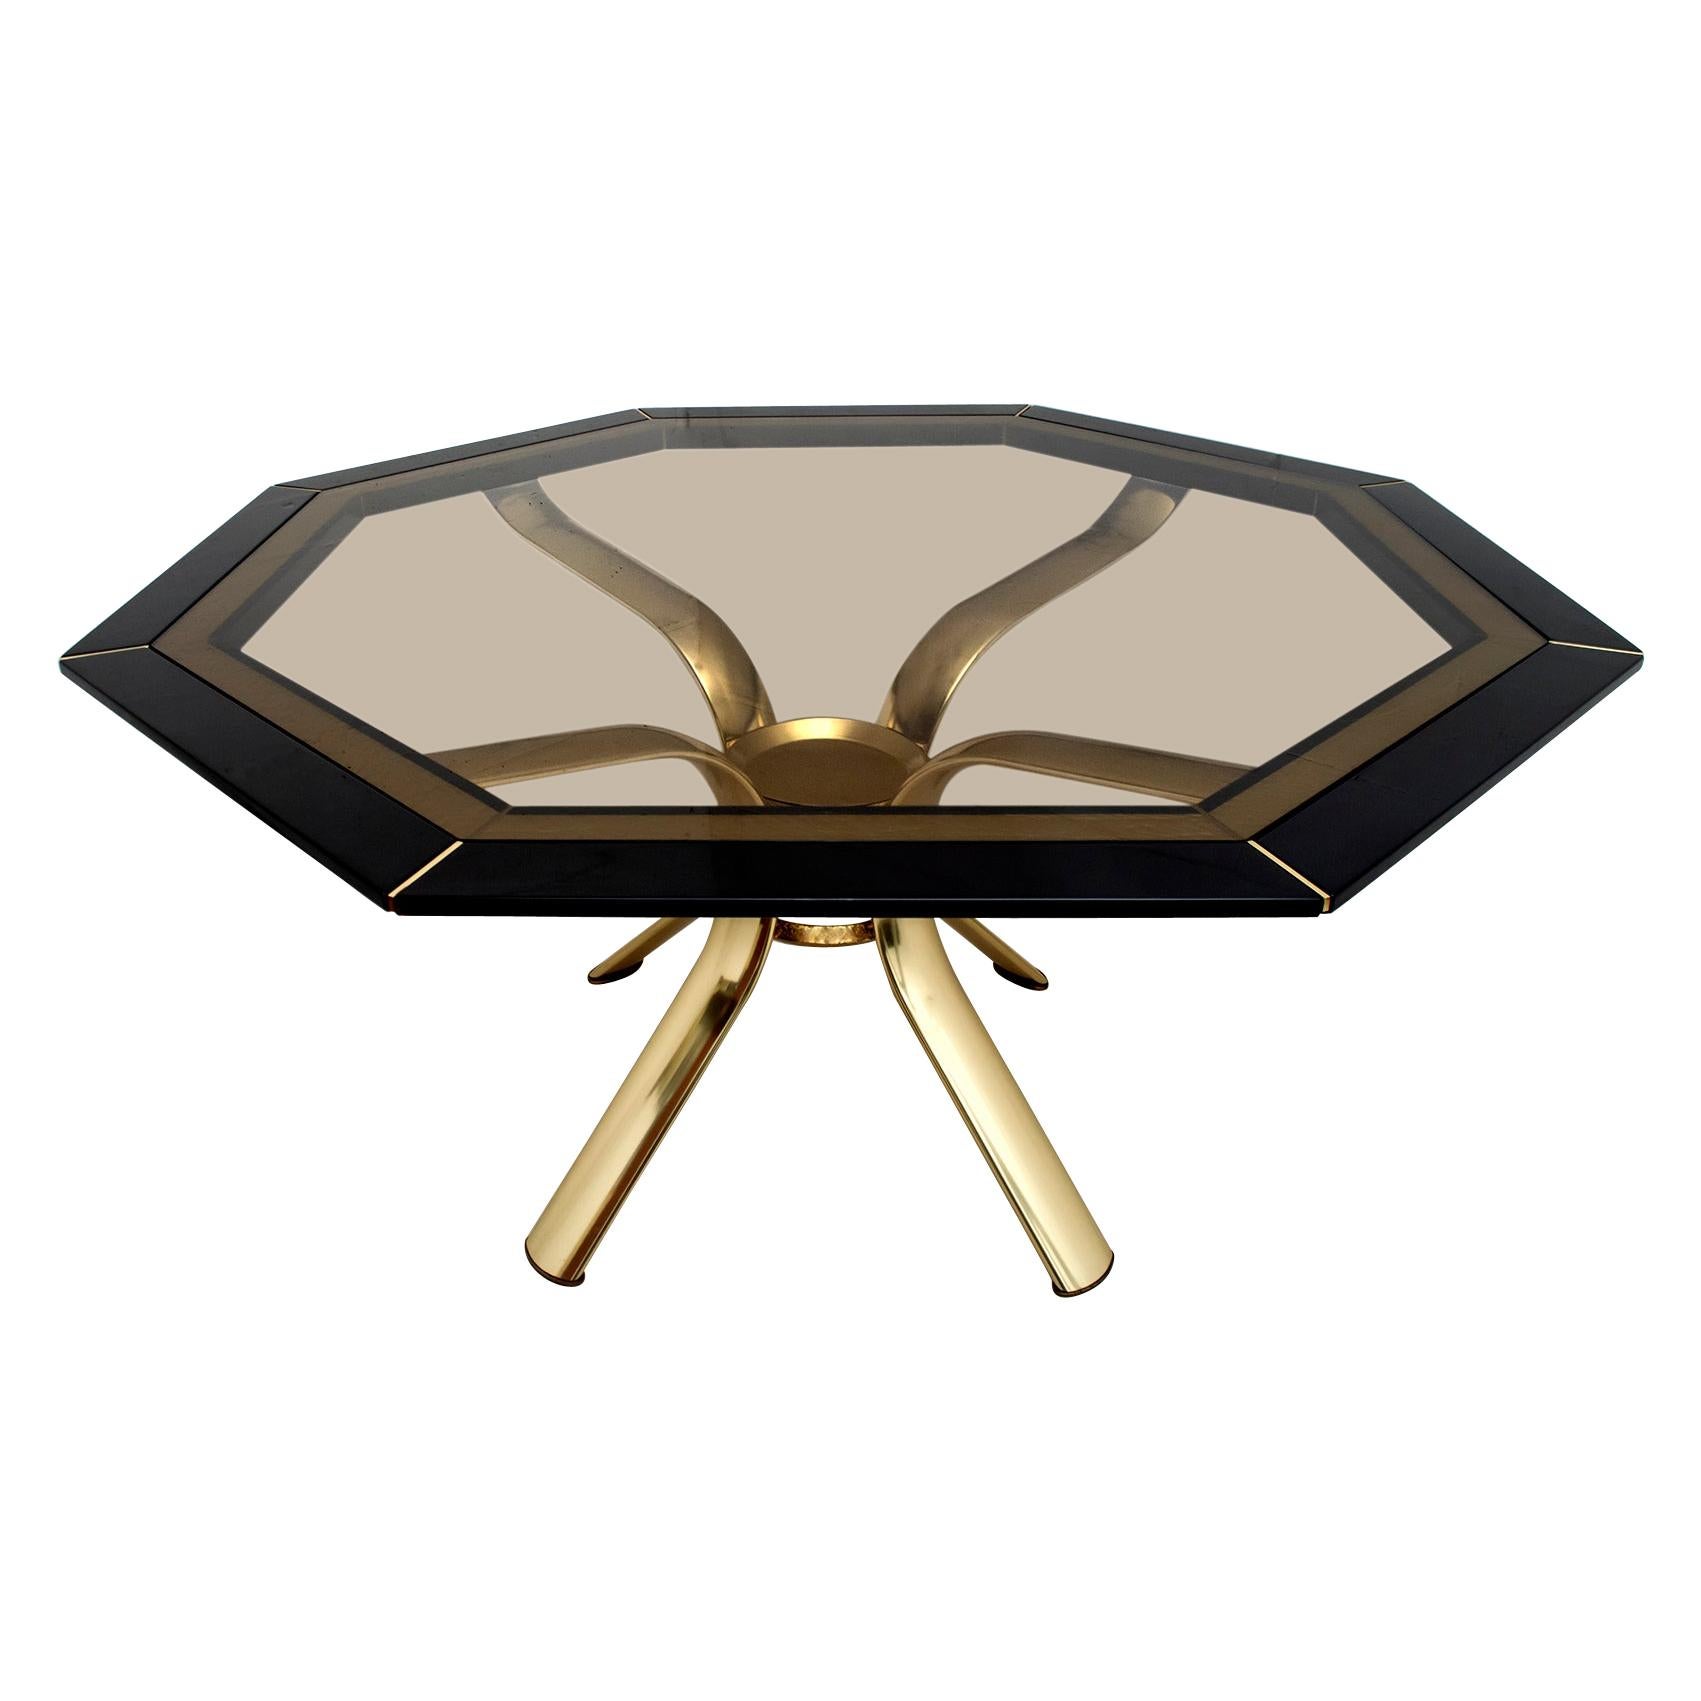 Pierre Cardin Octagonal Dining Table Black Lacquer with Brass Inserts and Base